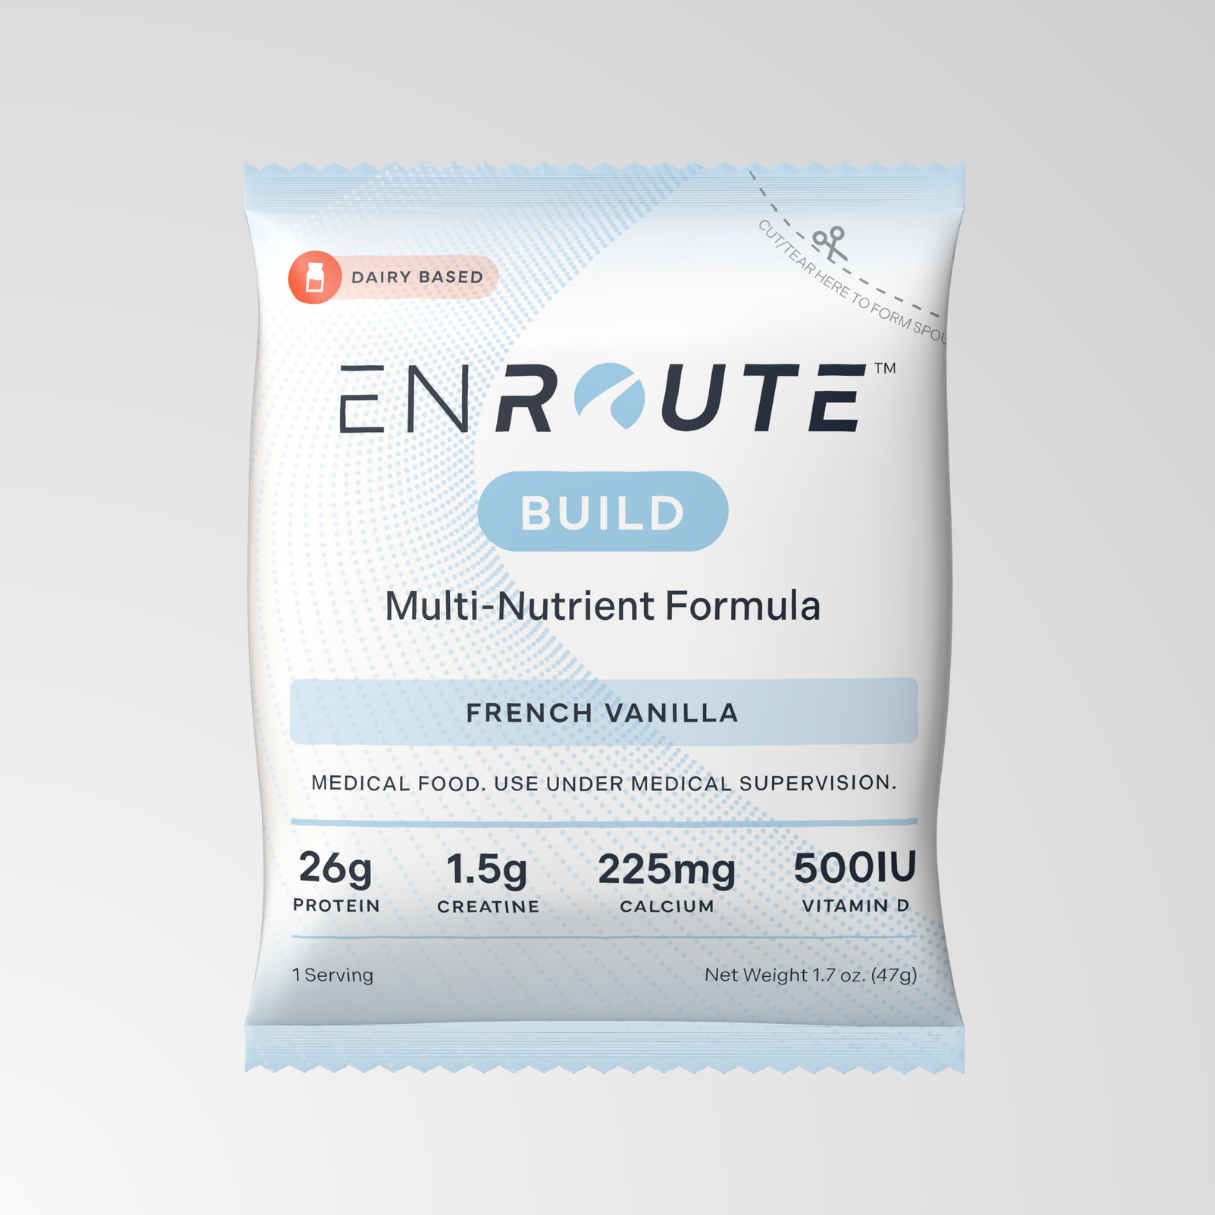 ENROUTE Build Multi-Nutrient Formula in French Vanilla Flavor. Medical Food. Use under medical supervision. Contains 26g protein, 1.5g creatine, 225mg calcium, 500IU vitamin D